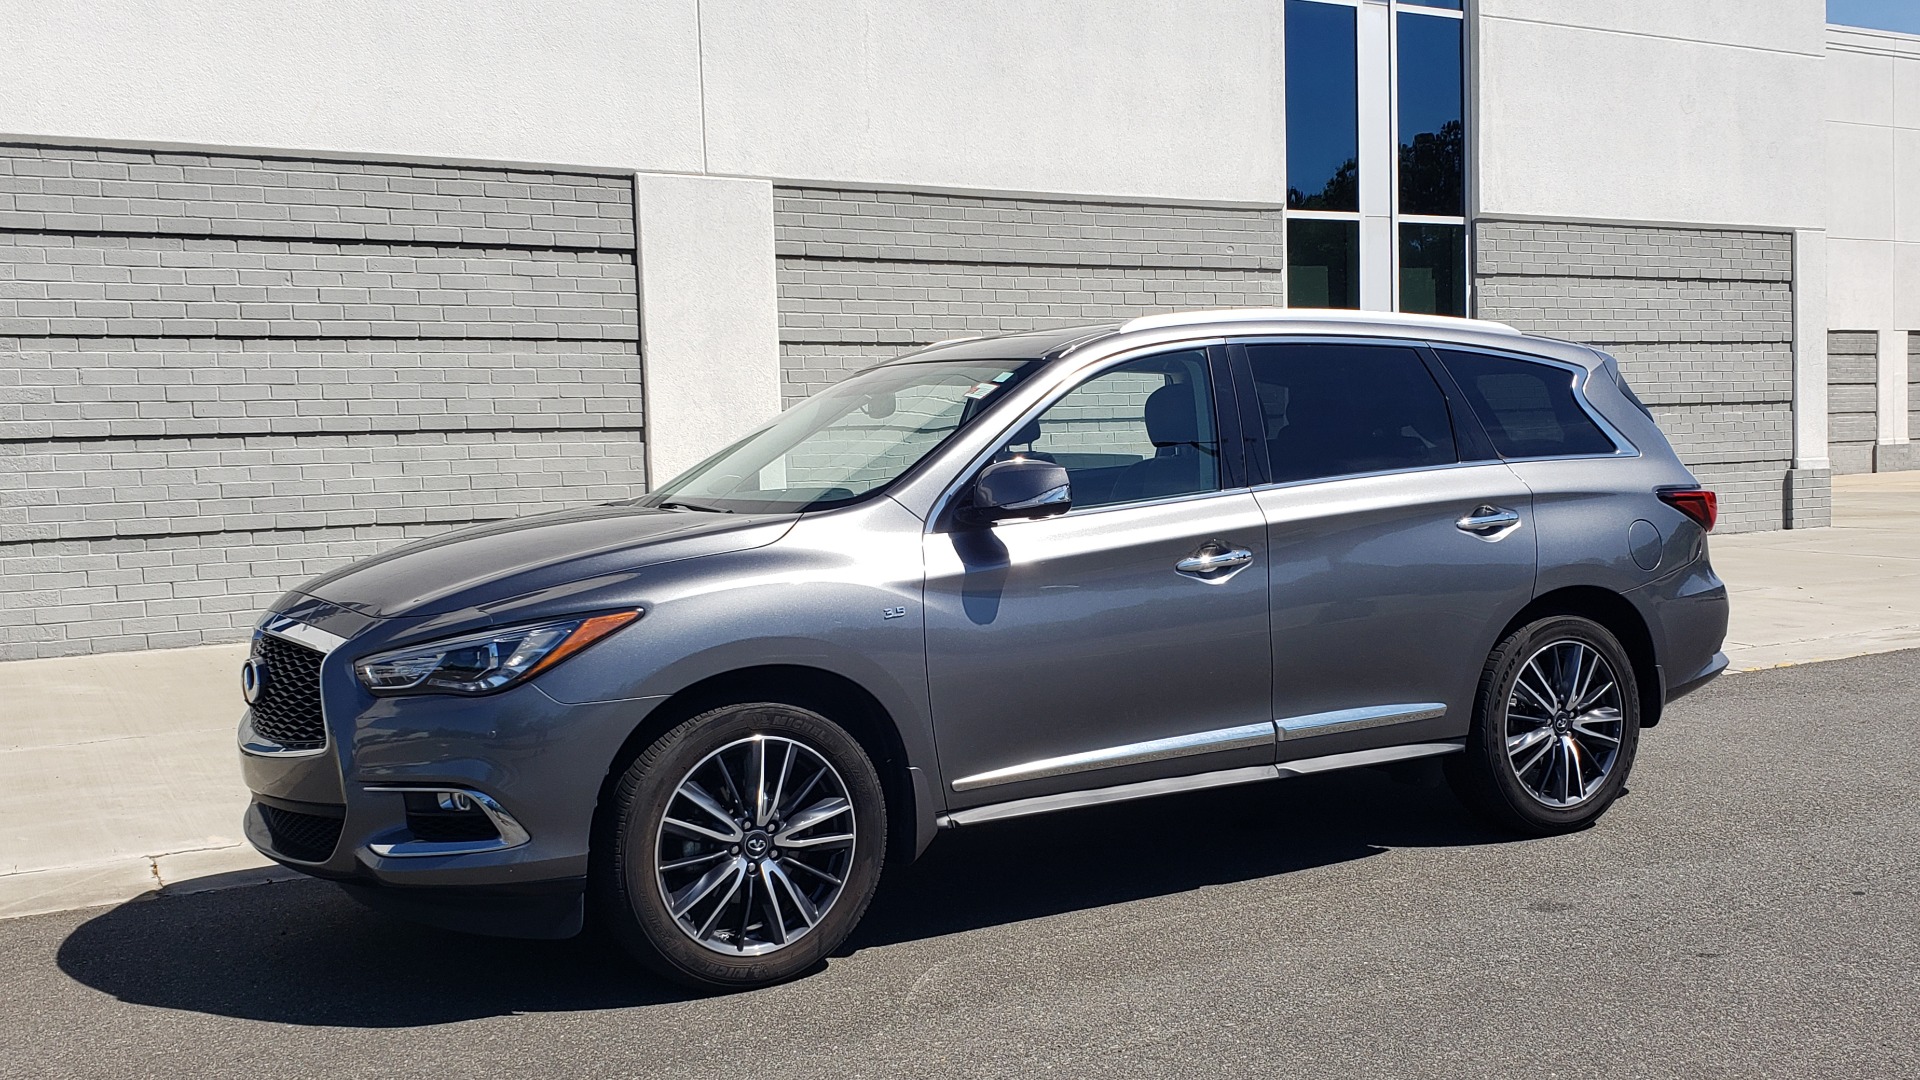 Used 2018 INFINITI QX60 3.5L V6 / FWD / CVT TRANS / NAV / SUNROOF / 3-ROWS / REARVIEW for sale Sold at Formula Imports in Charlotte NC 28227 4